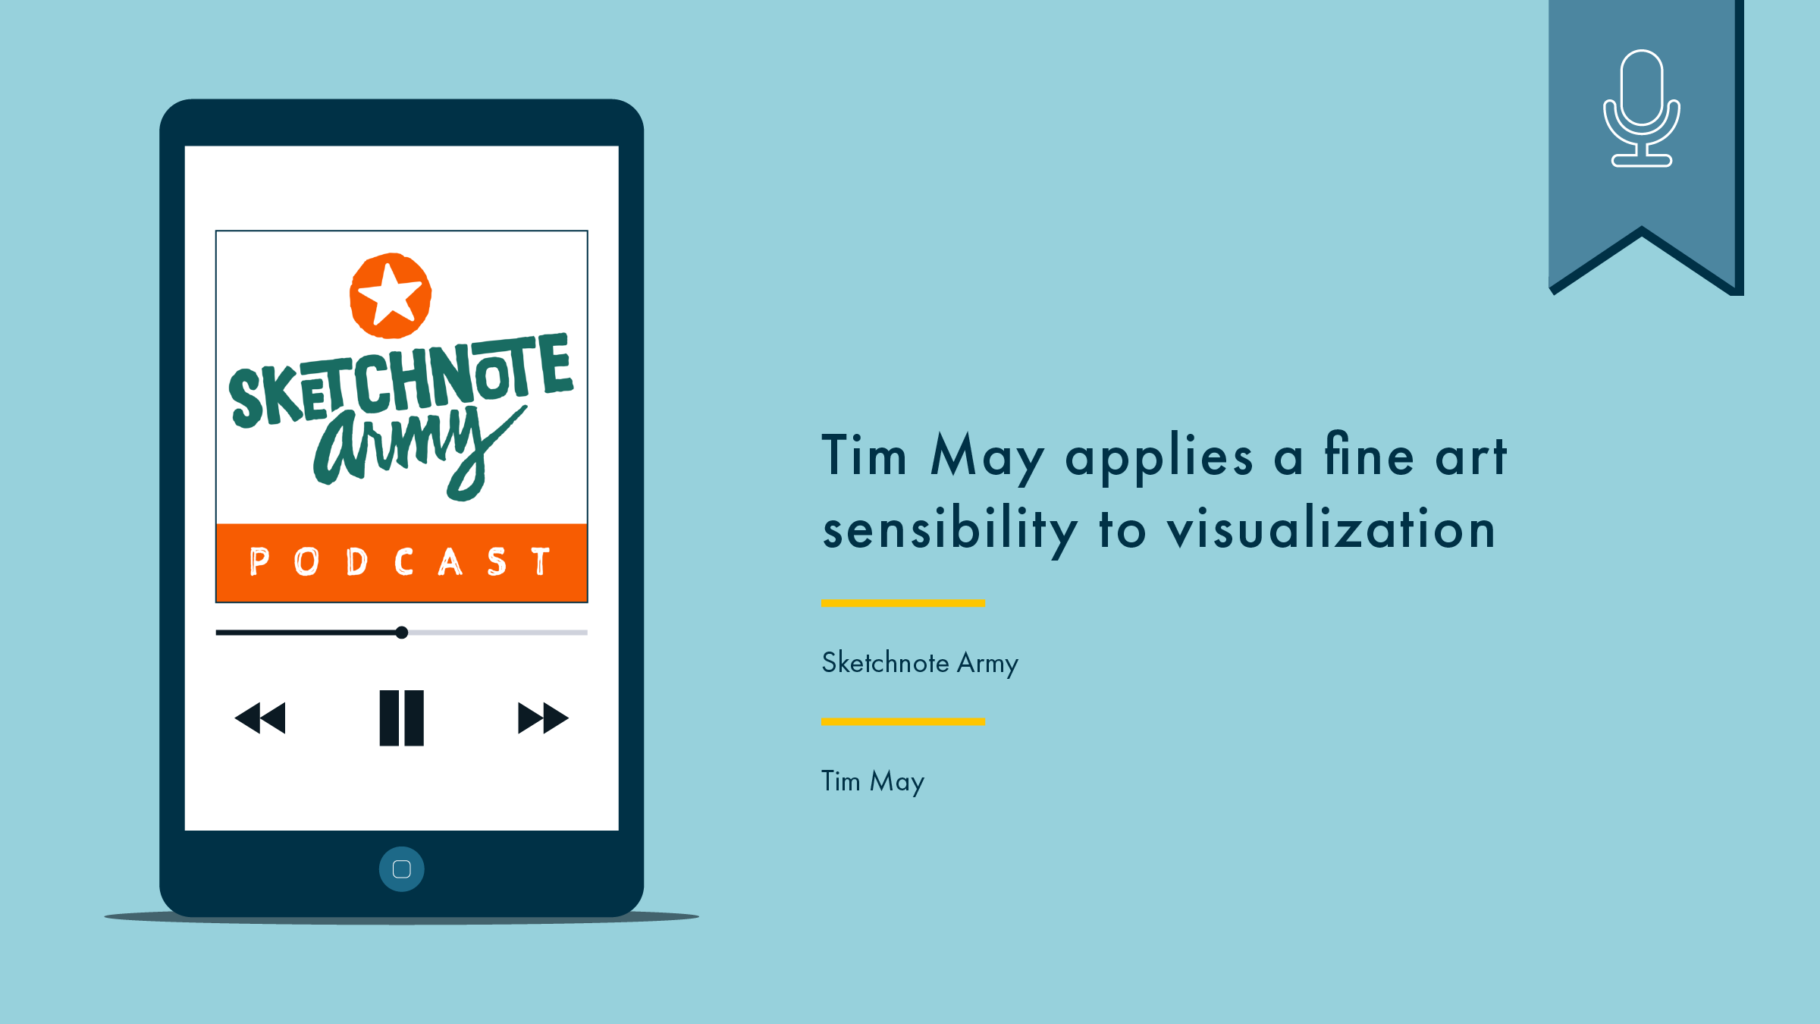 Phone with podcast artwork on the left. On the right reads “Tim May applies a fine art sensibility to visualization” Above is a blue flag with a white icon denoting that this is a podcast.